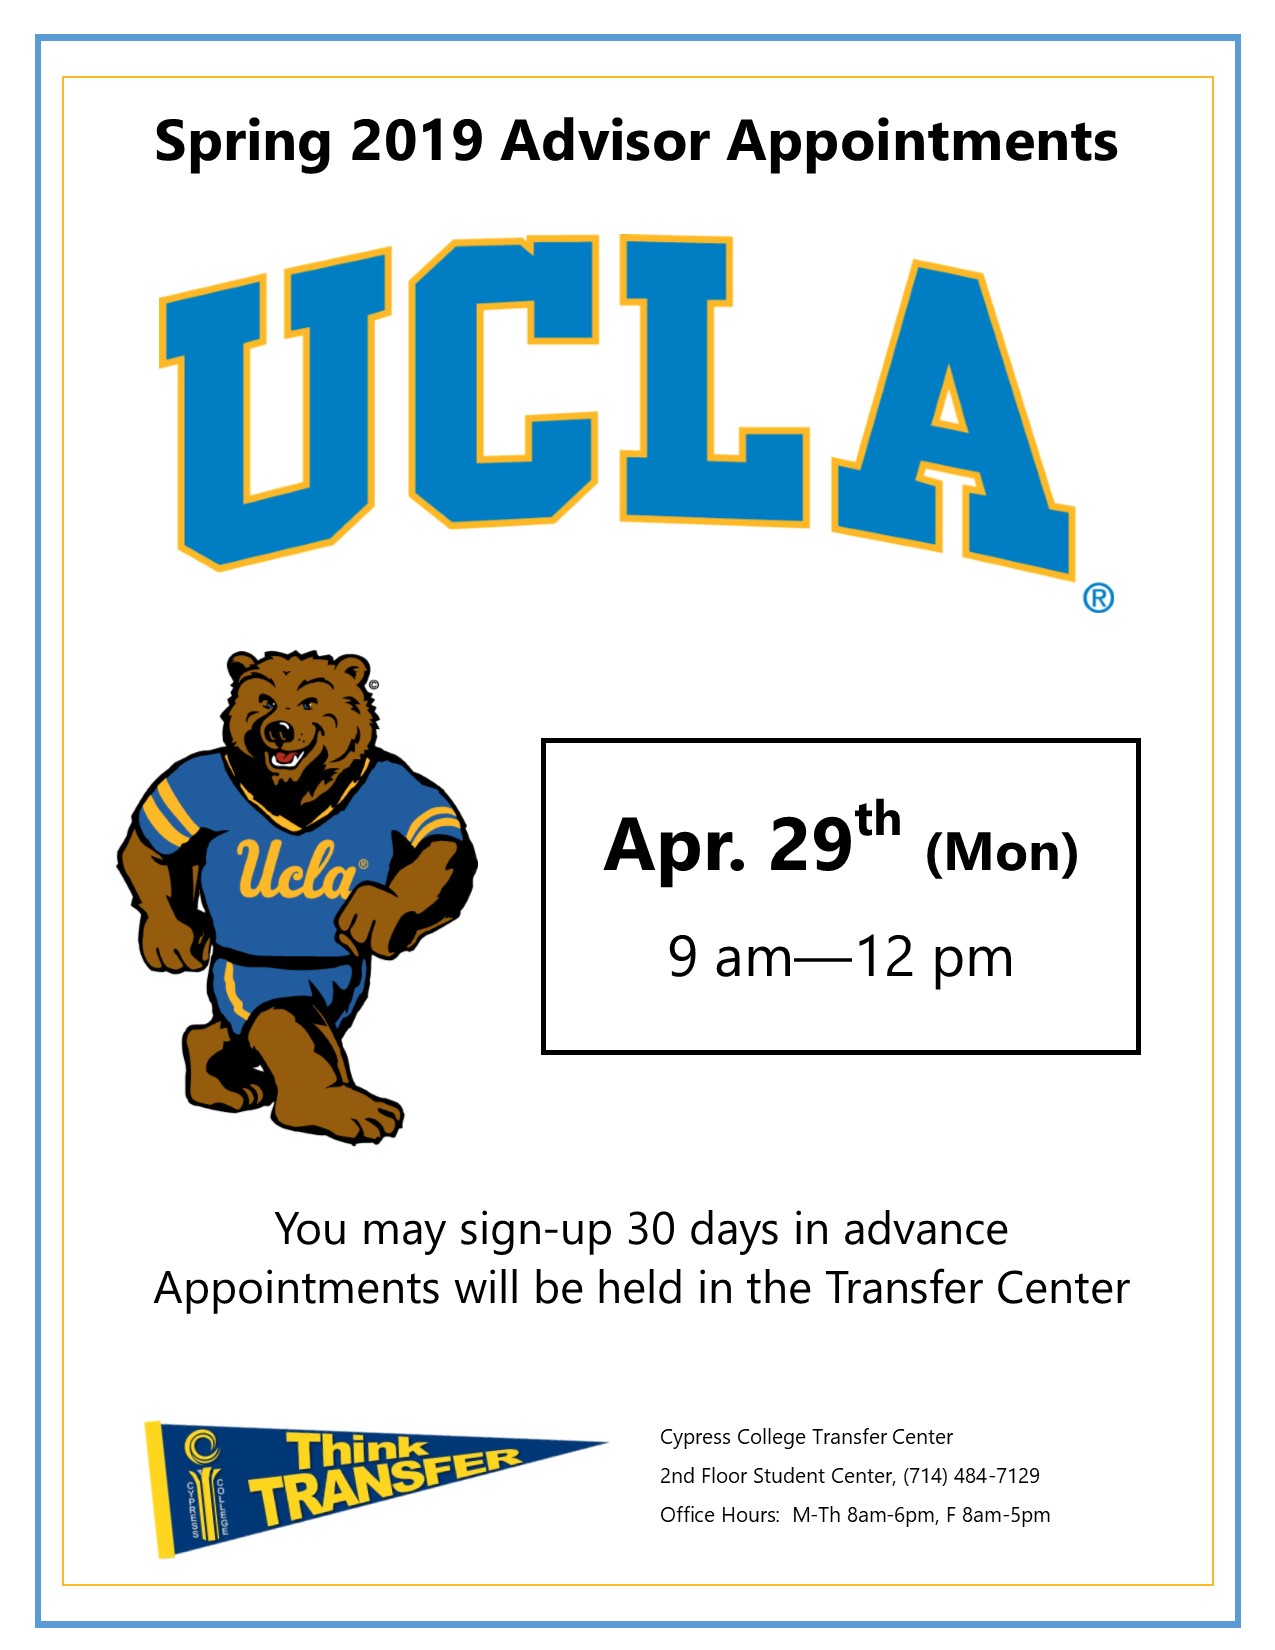 Spring 2019 Advisor Appointments UCLA flyer